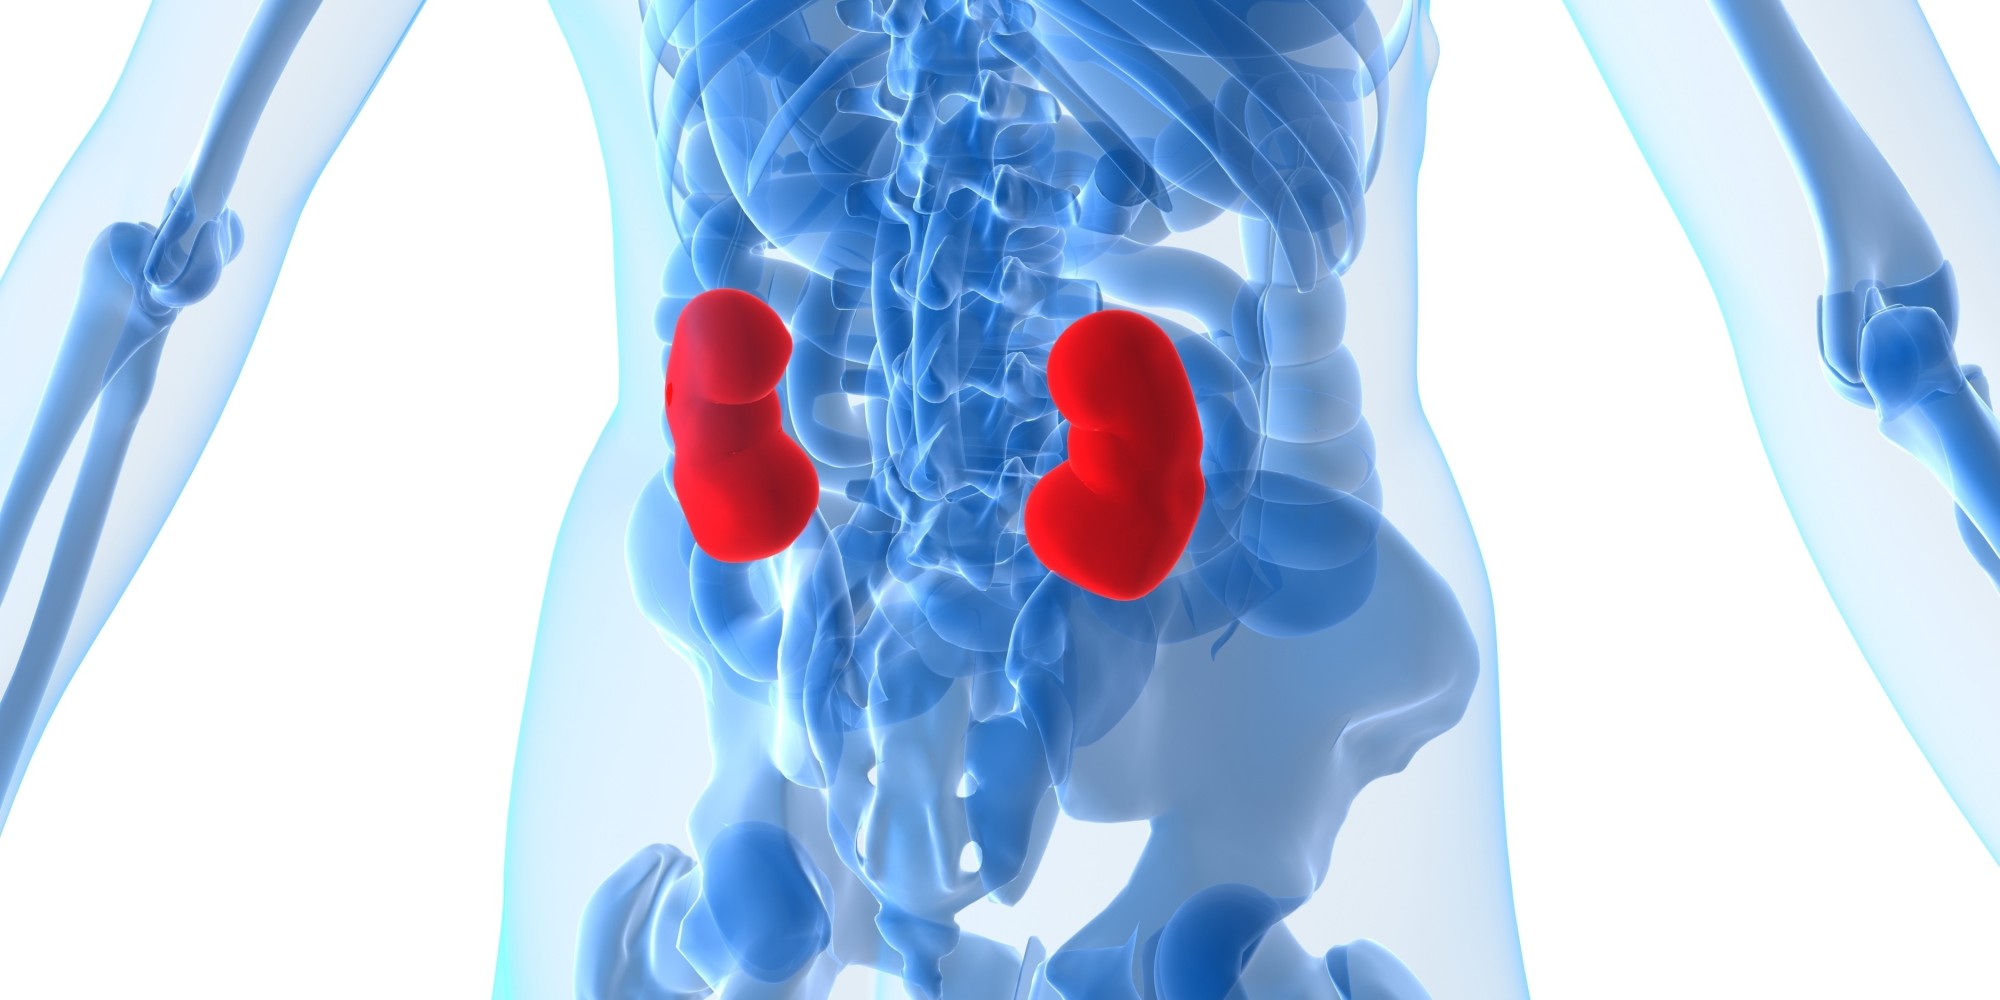 What Everyone Should Know About Kidney Cancer | HuffPost